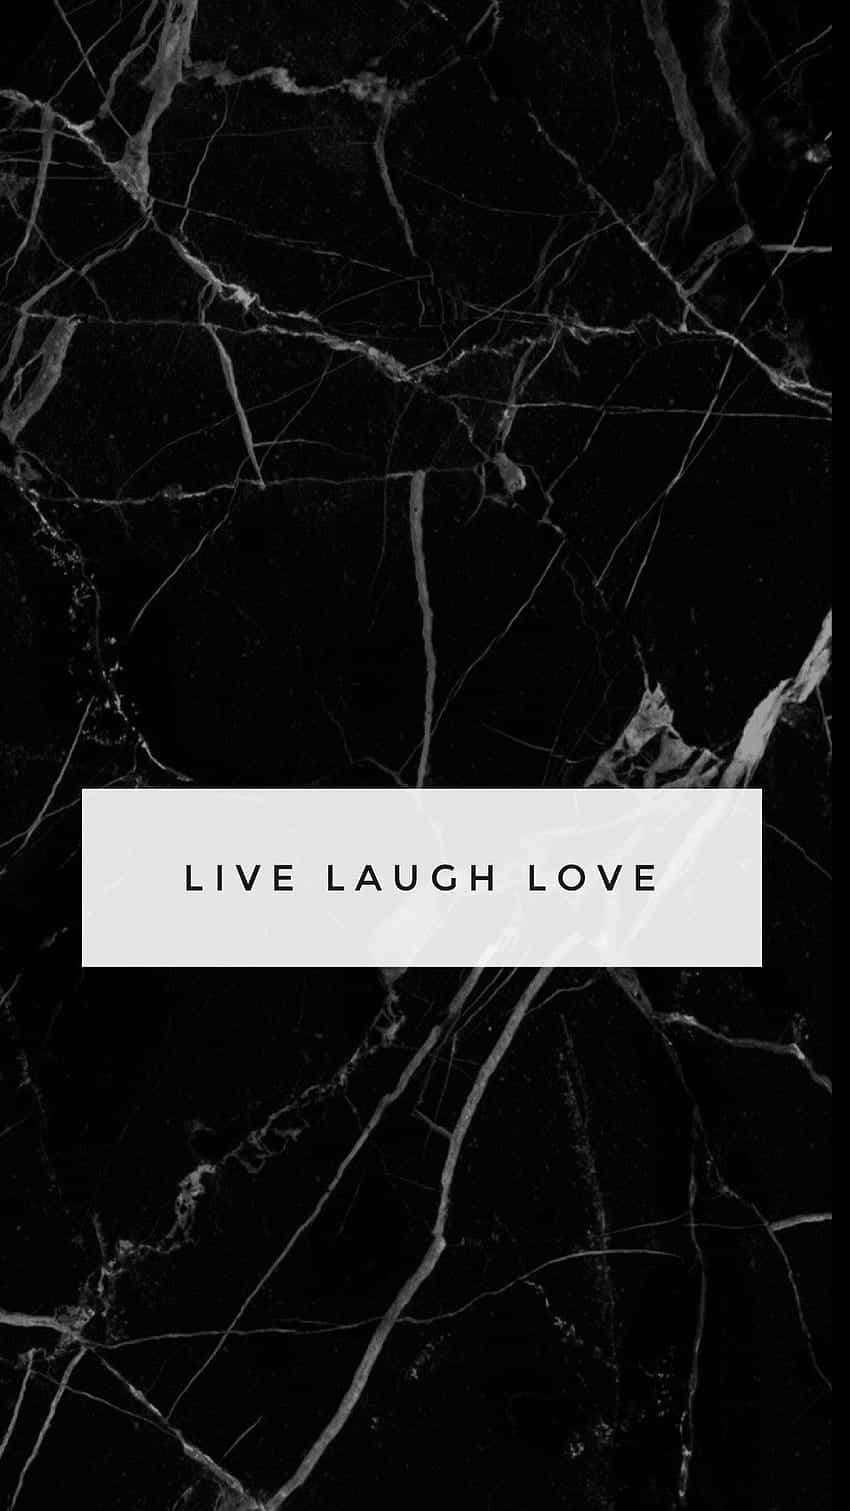 Image  Live with Passion, Laugh Out Loud and Find Love Everyday Wallpaper